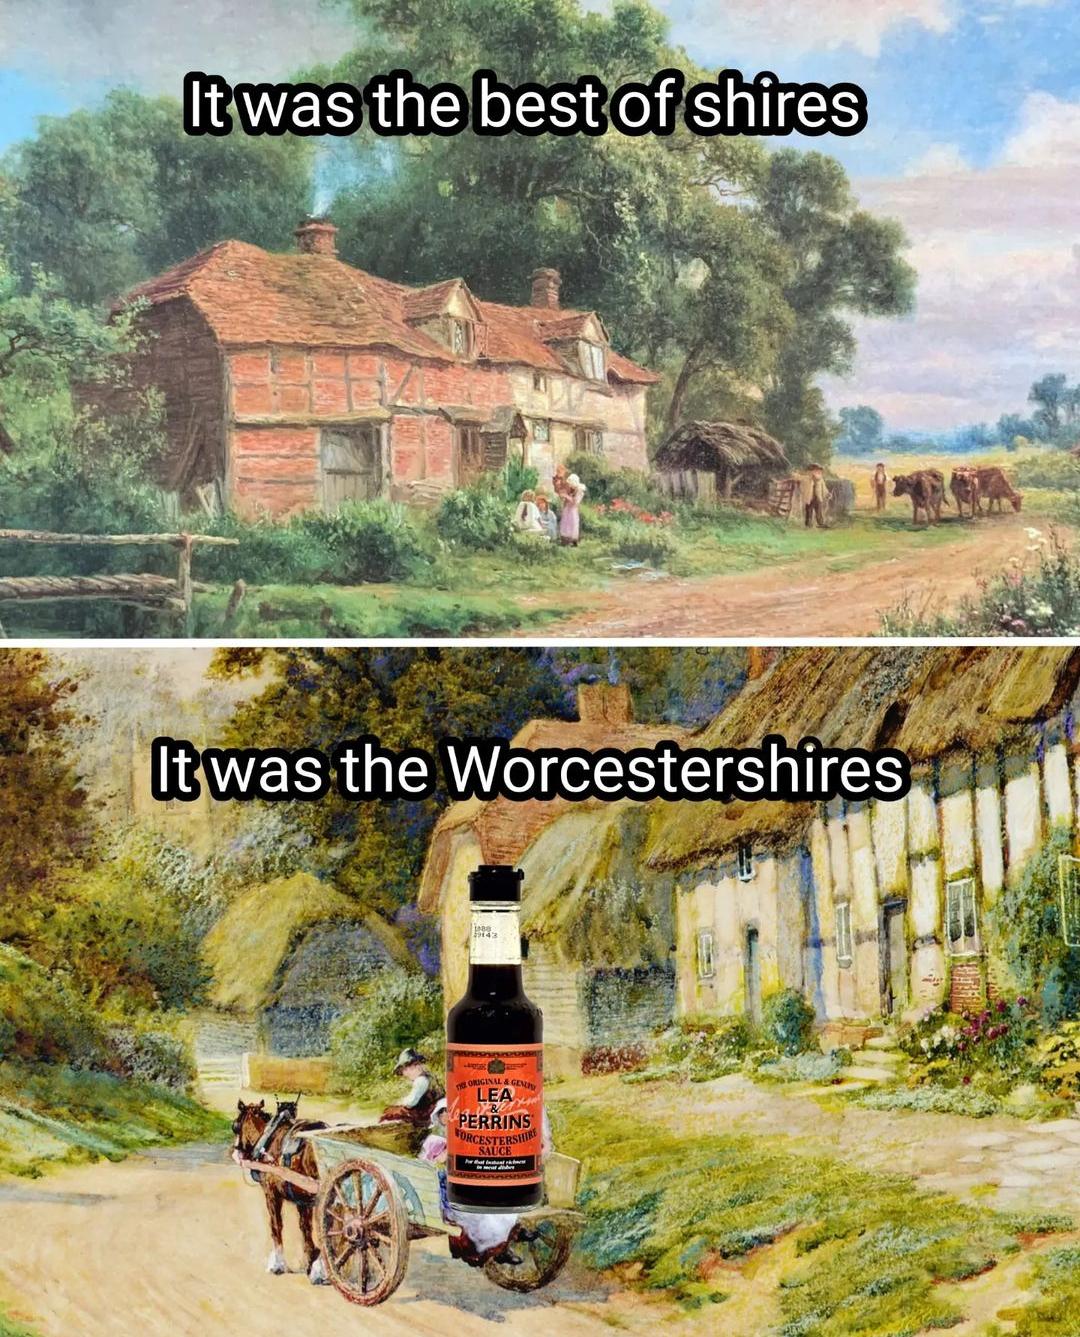 cool pics and memes - painting - It was the best of shires It was the Worcestershires $15 2 Original & Gen Lea VaRms Perrins Forcestershir Sauce